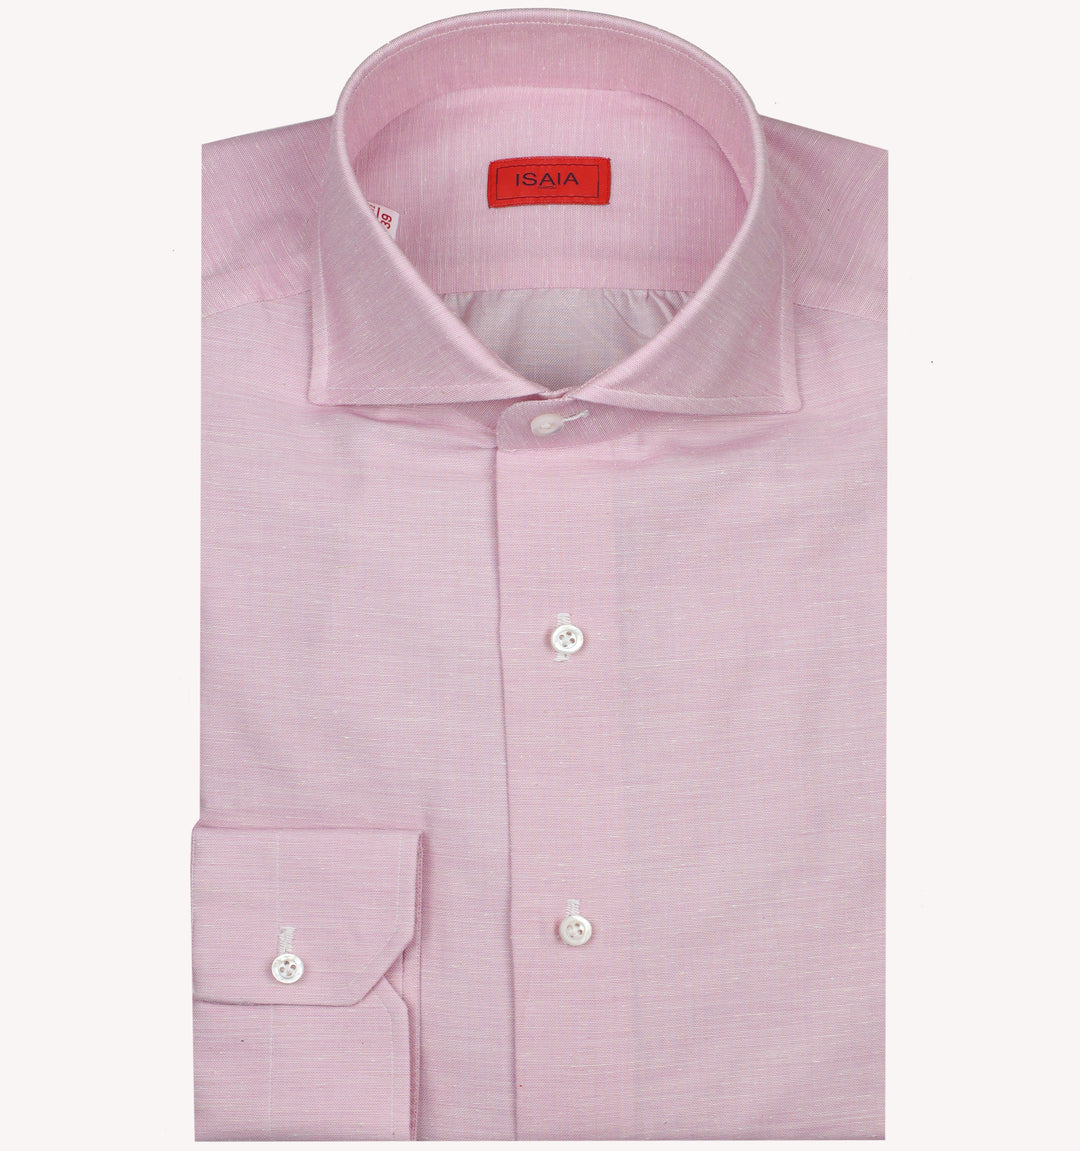 Isaia Dress Shirt in Pink